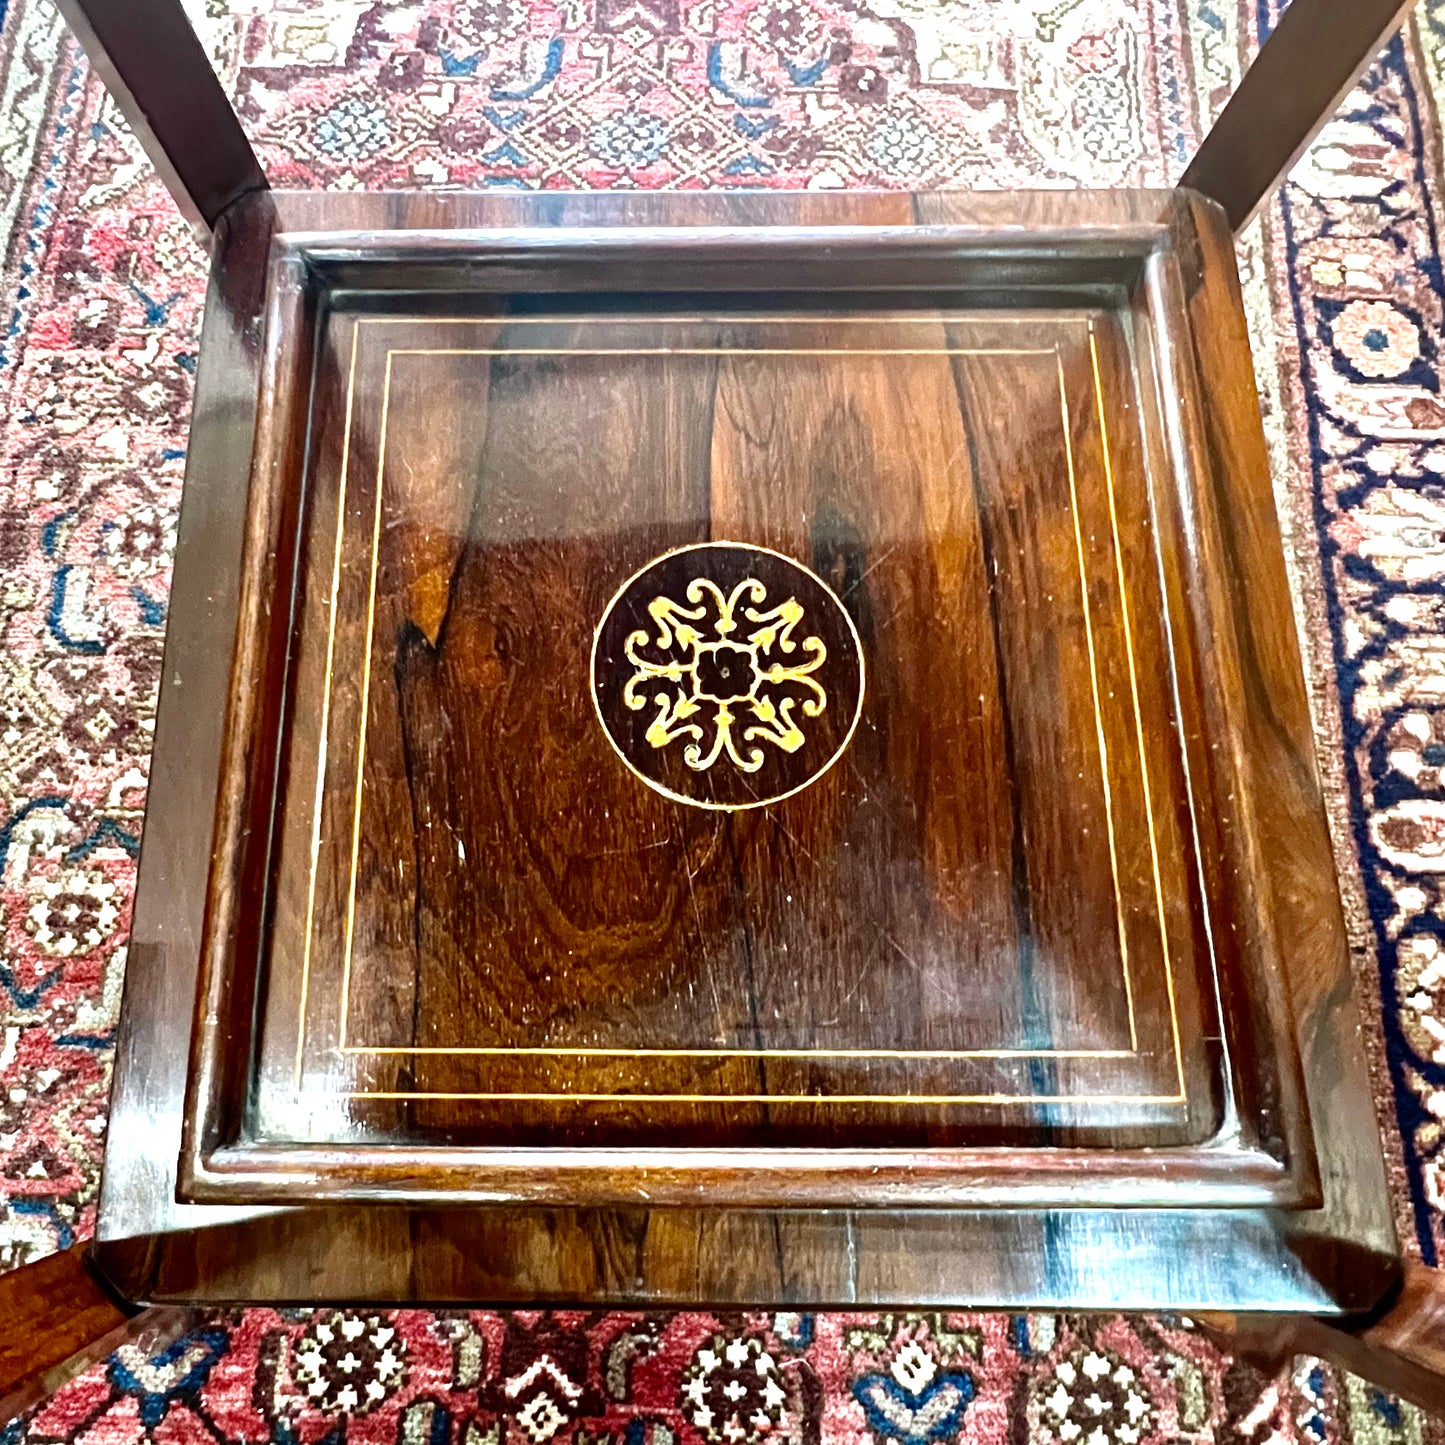 Antique Edwardian rosewood side table with marquetry inlay